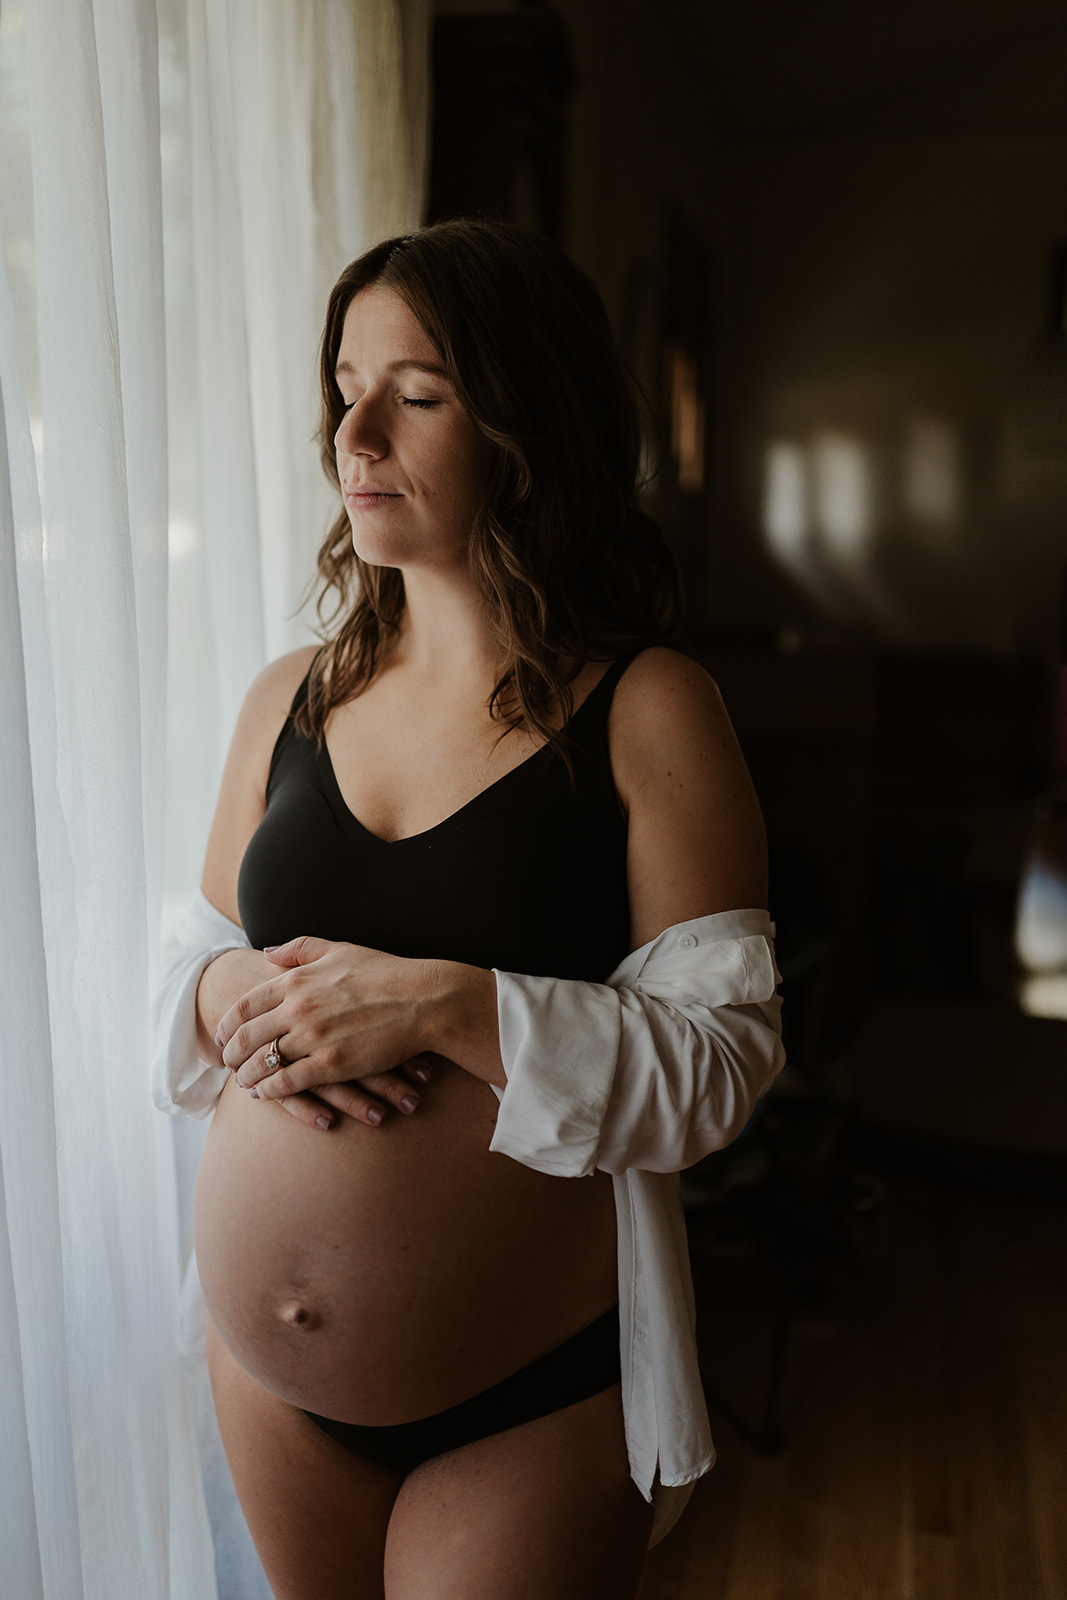 Maternity session in a Madison home with a new mama closing her eyes by the window